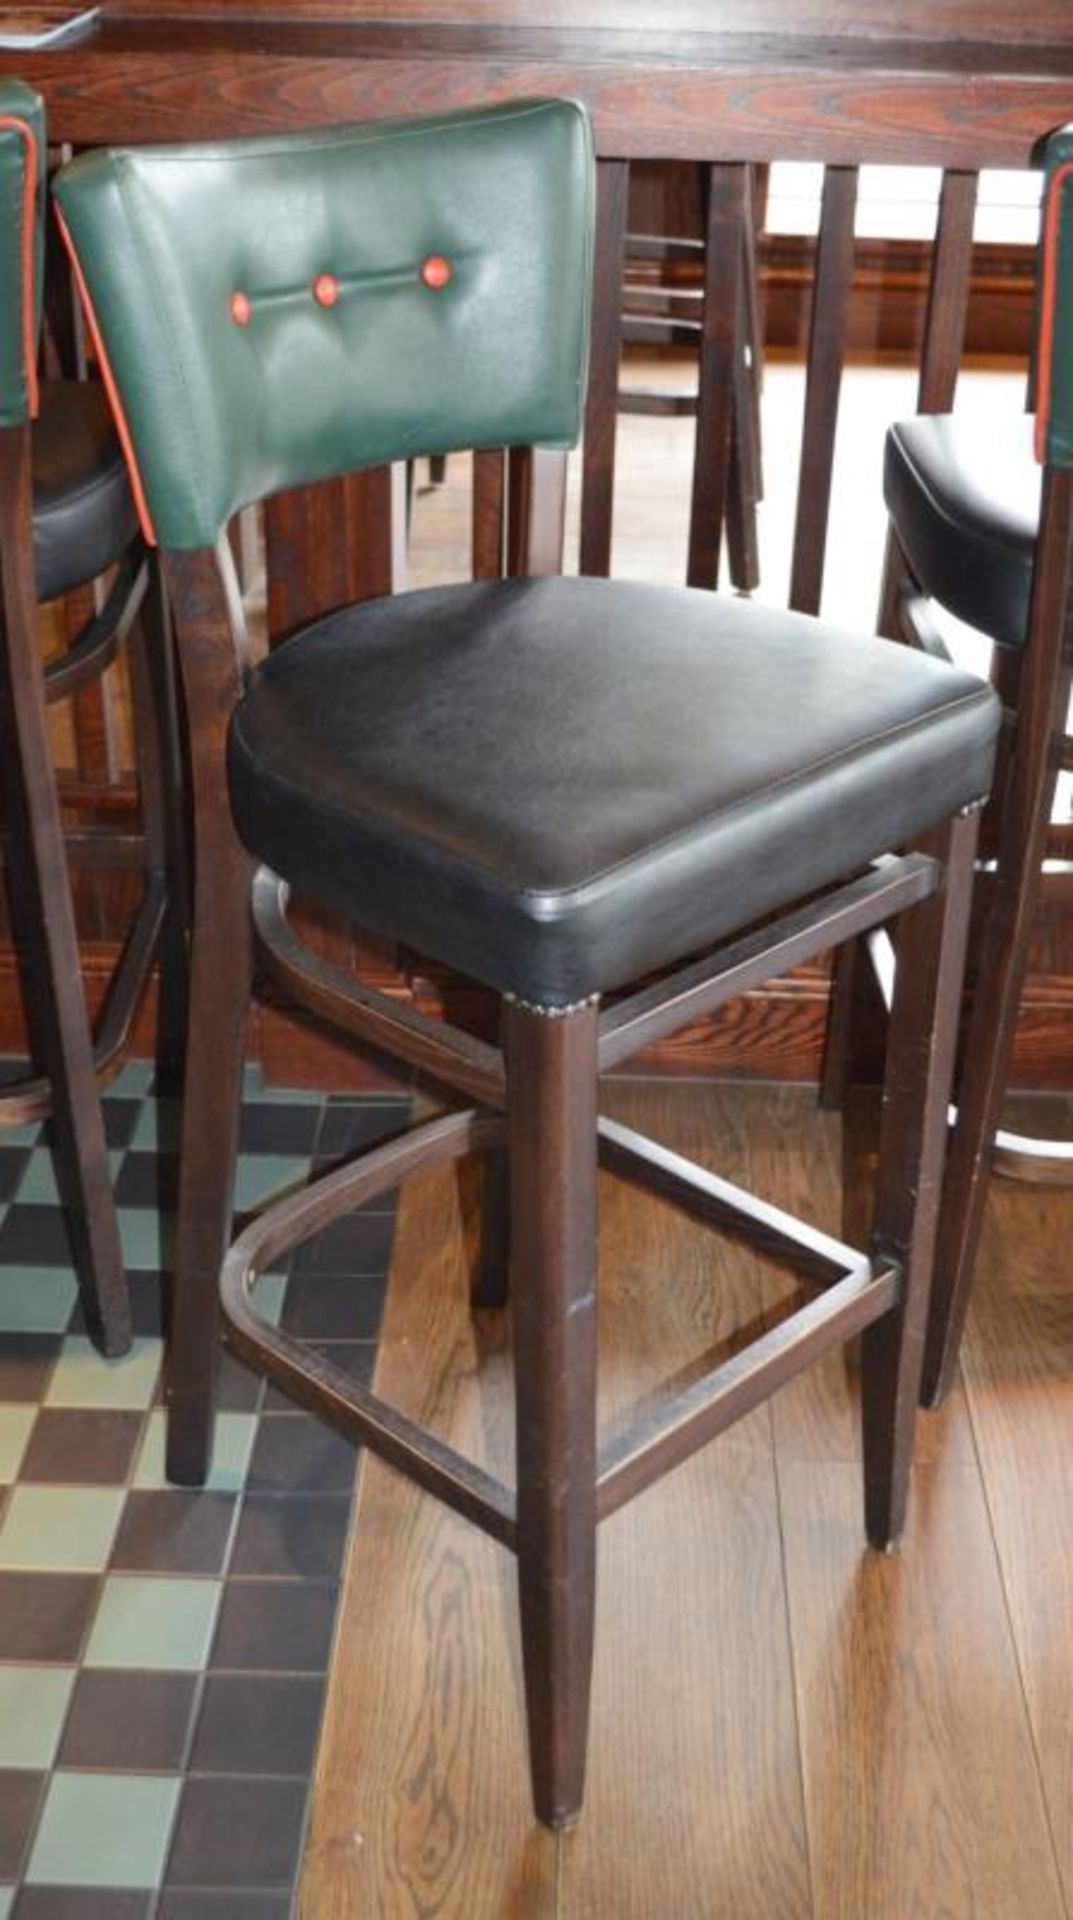 3 x Contemporary Button Back Restaurant Bar Stools - Upholstered in Green & Black Faux Leather